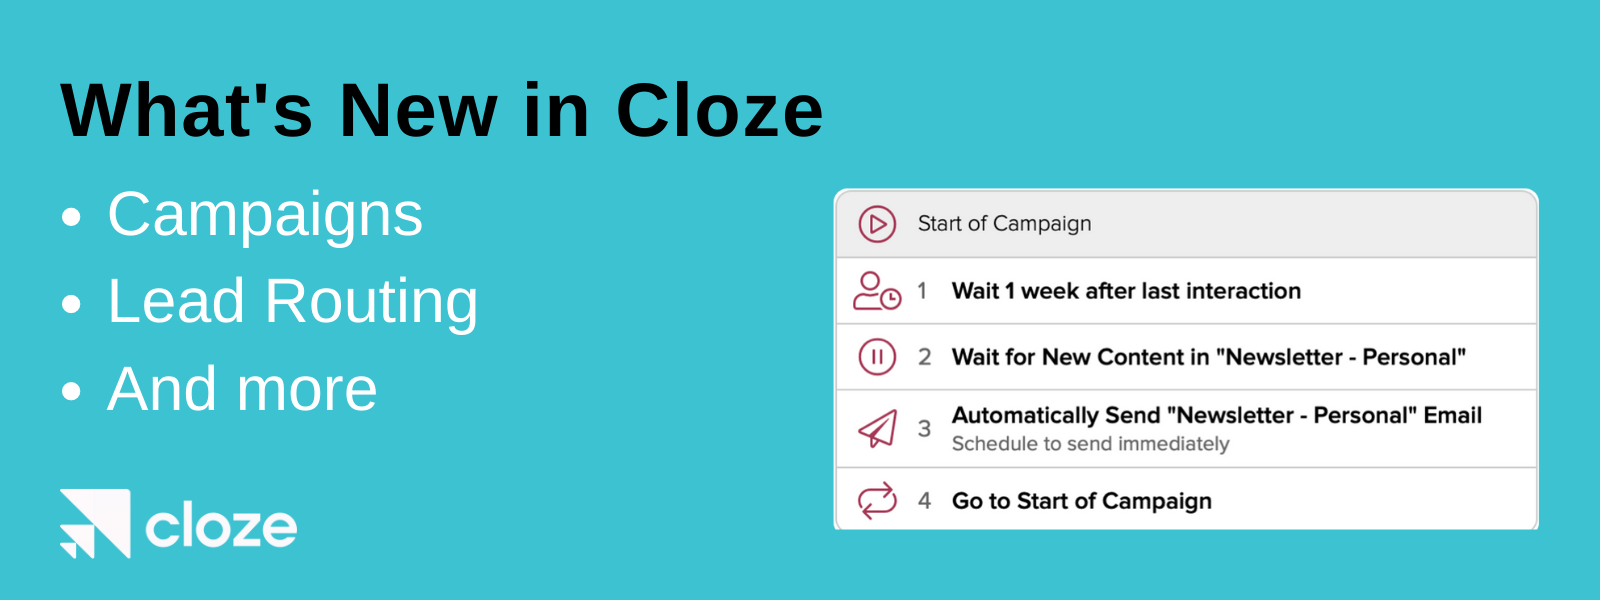 What's new in Cloze. Campaigns, leading routing, and more.